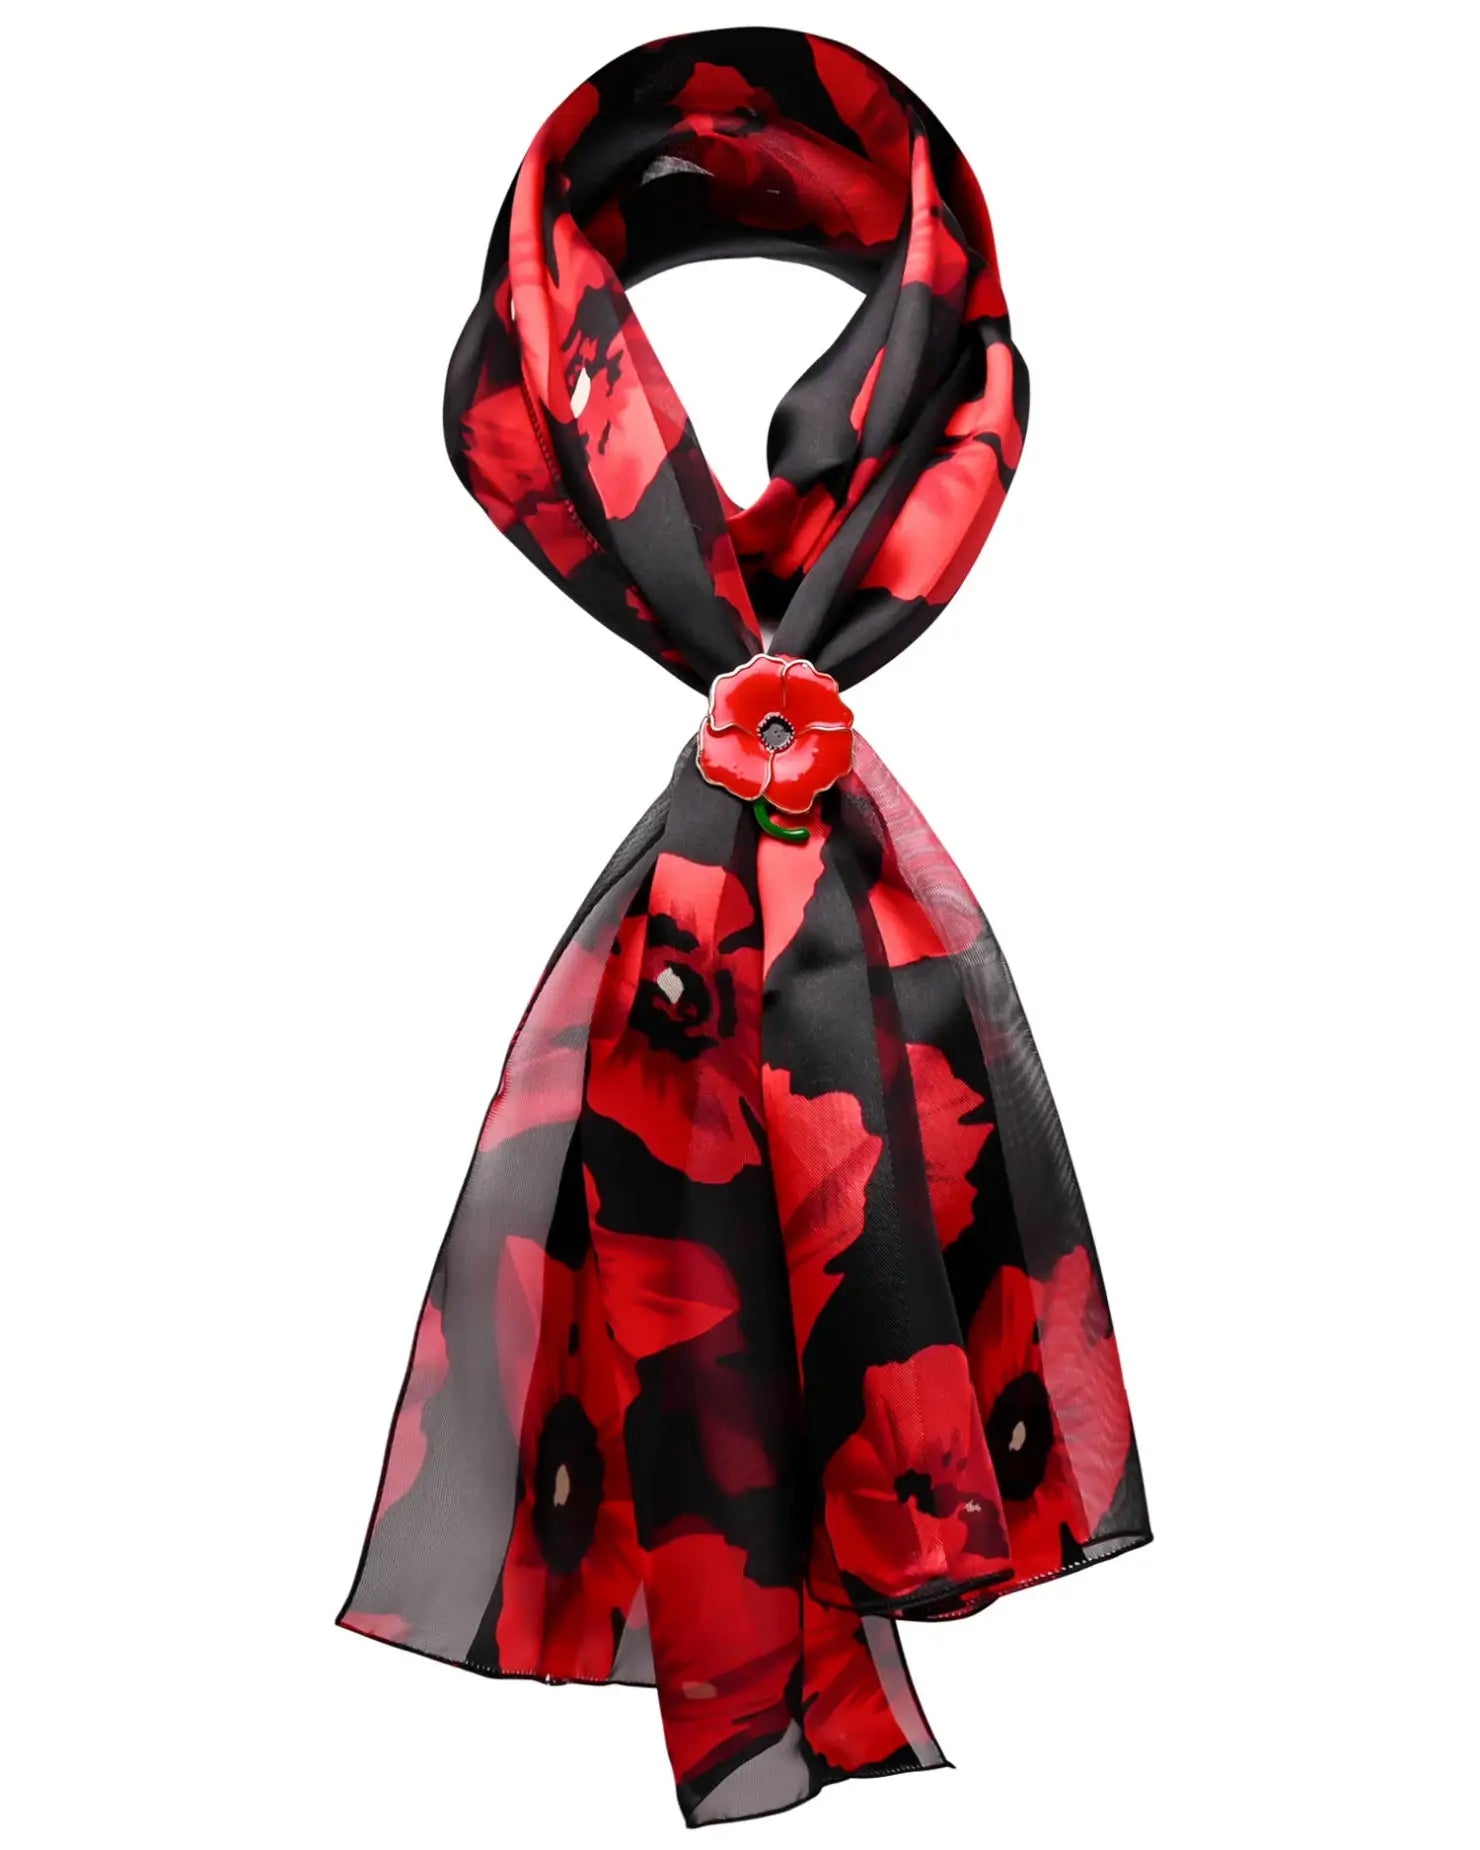 Poppy floral print scarf and ring set in red and black design